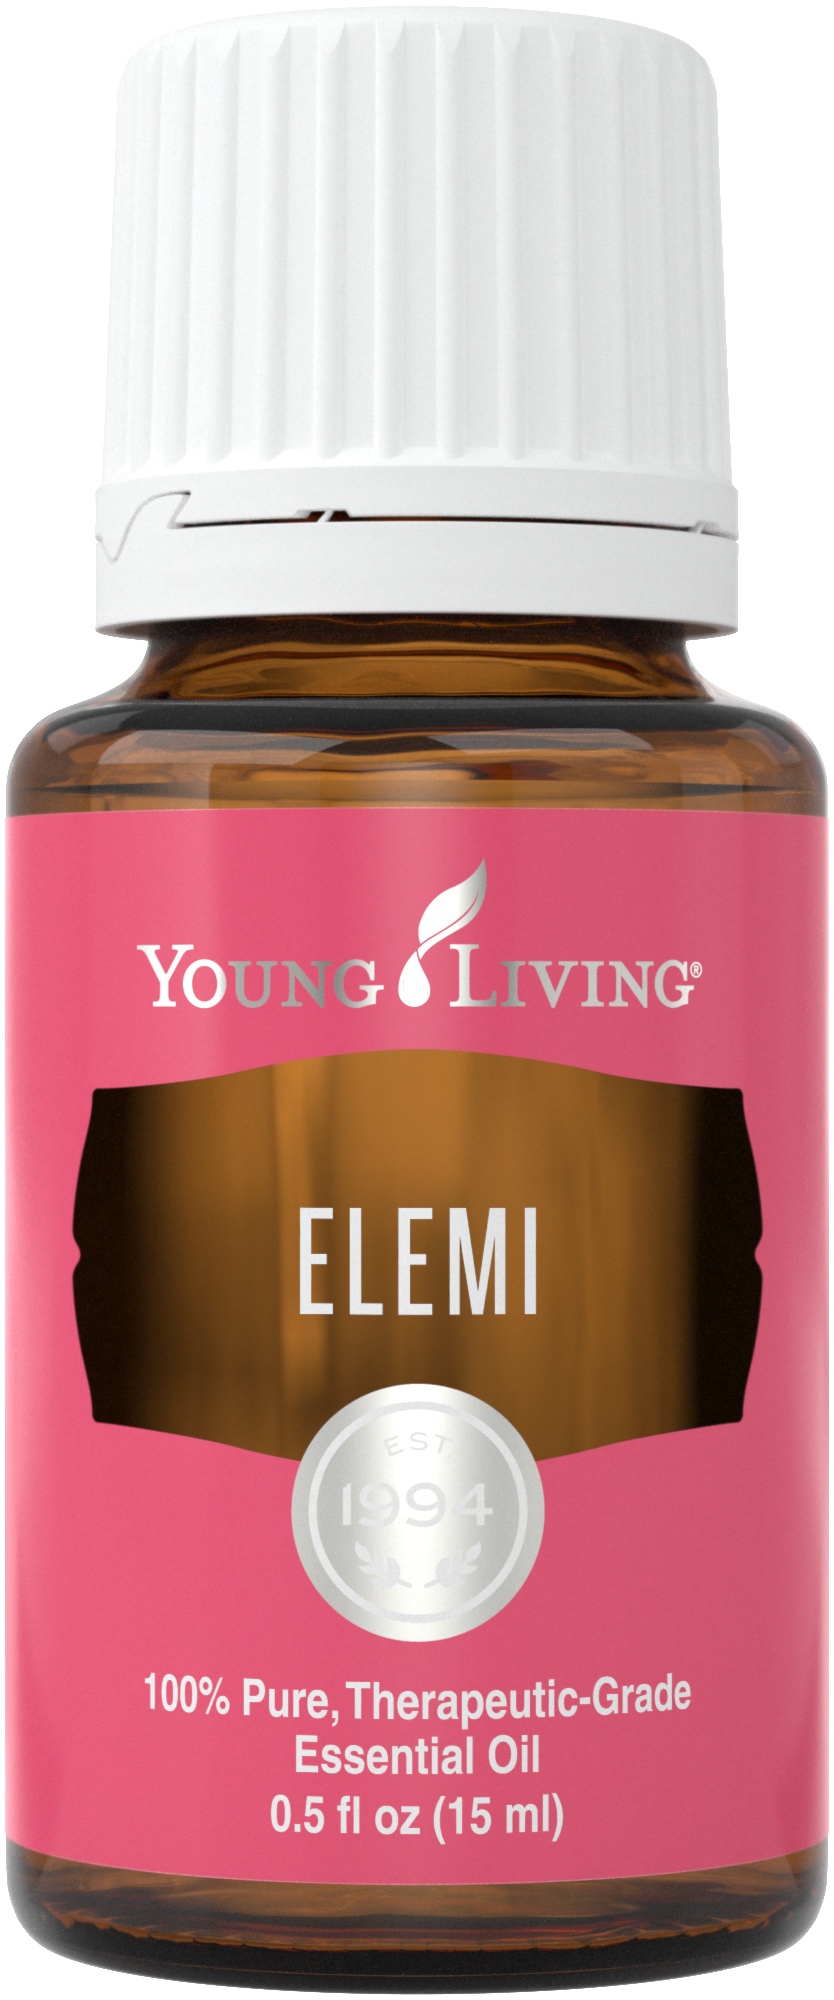 Elemi essential oil | Young Living